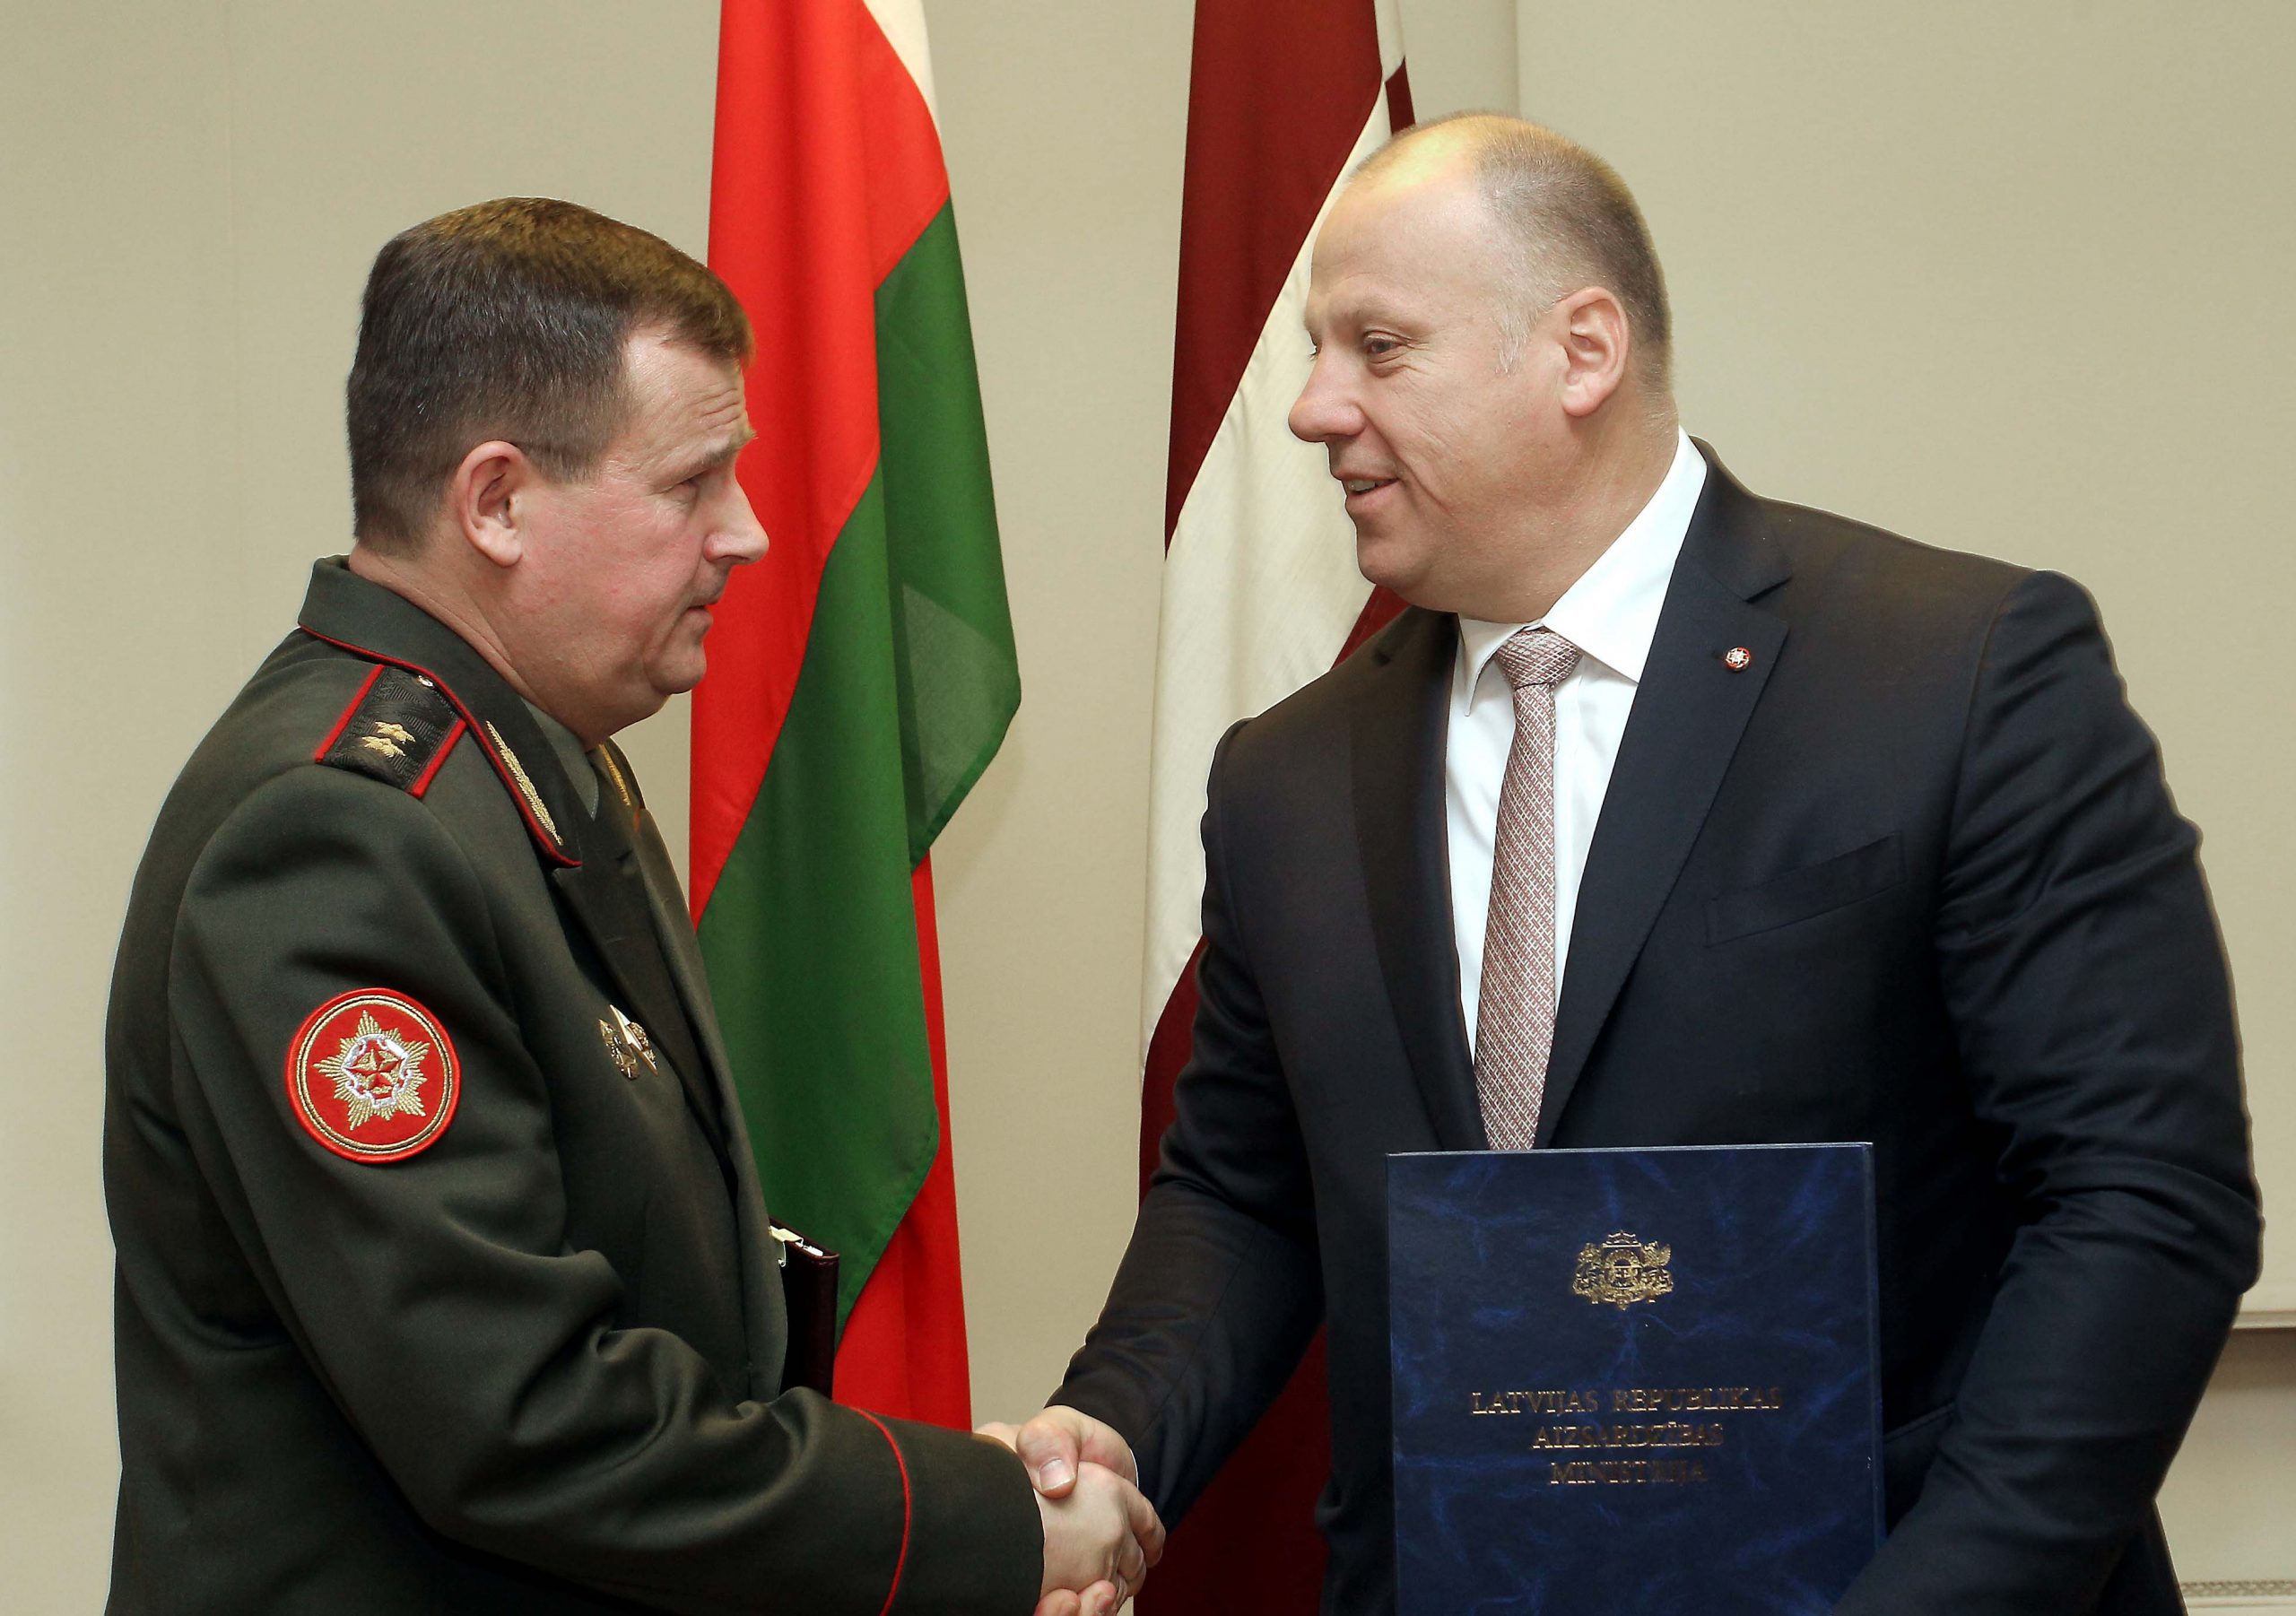 Belarus and NATO: still far from cooperation, but dialogue starts